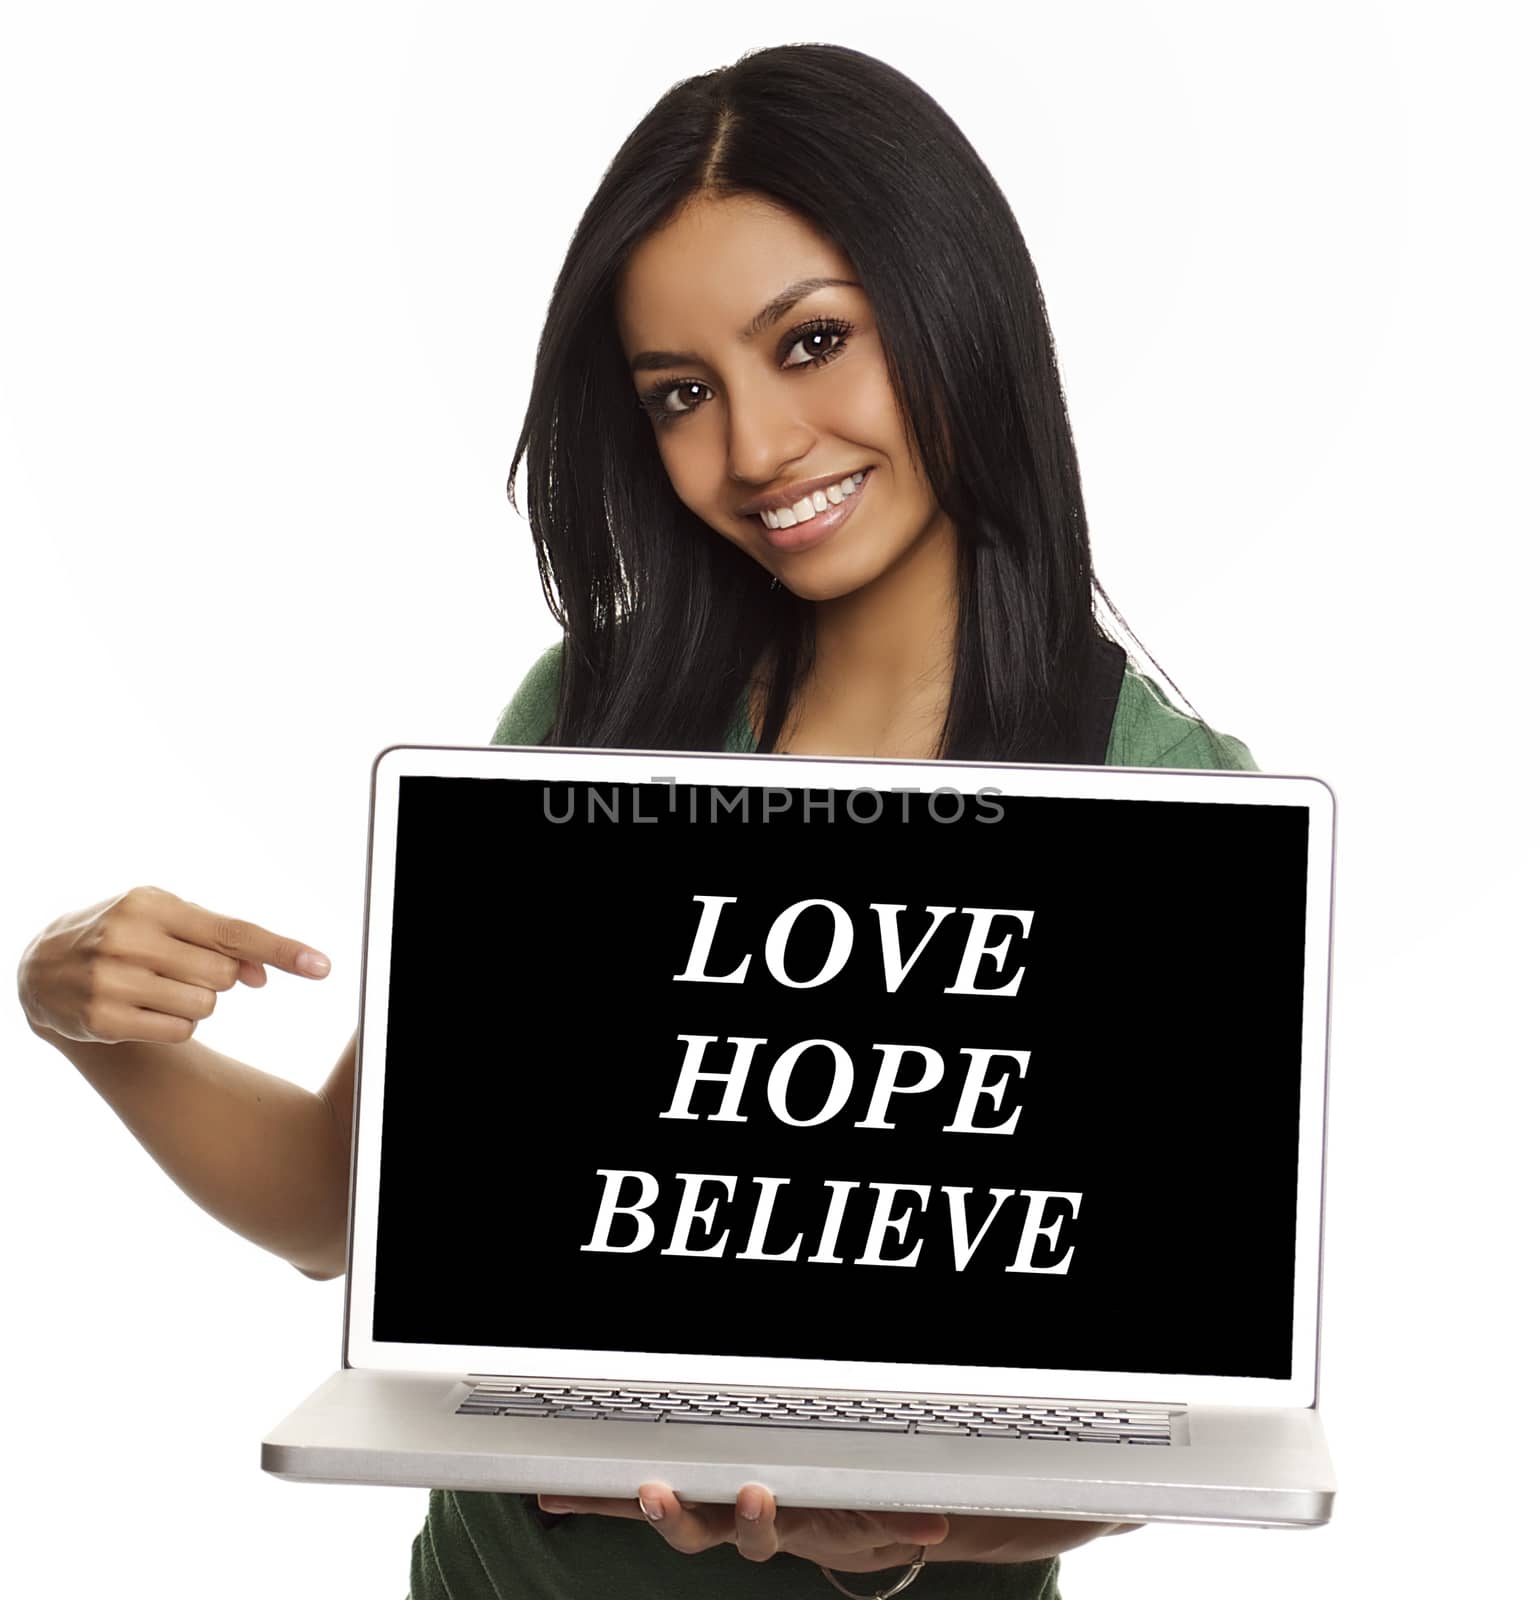 Pretty young woman pointing to inspiring aspirational message on laptop computer: Love,Hope,Believe.